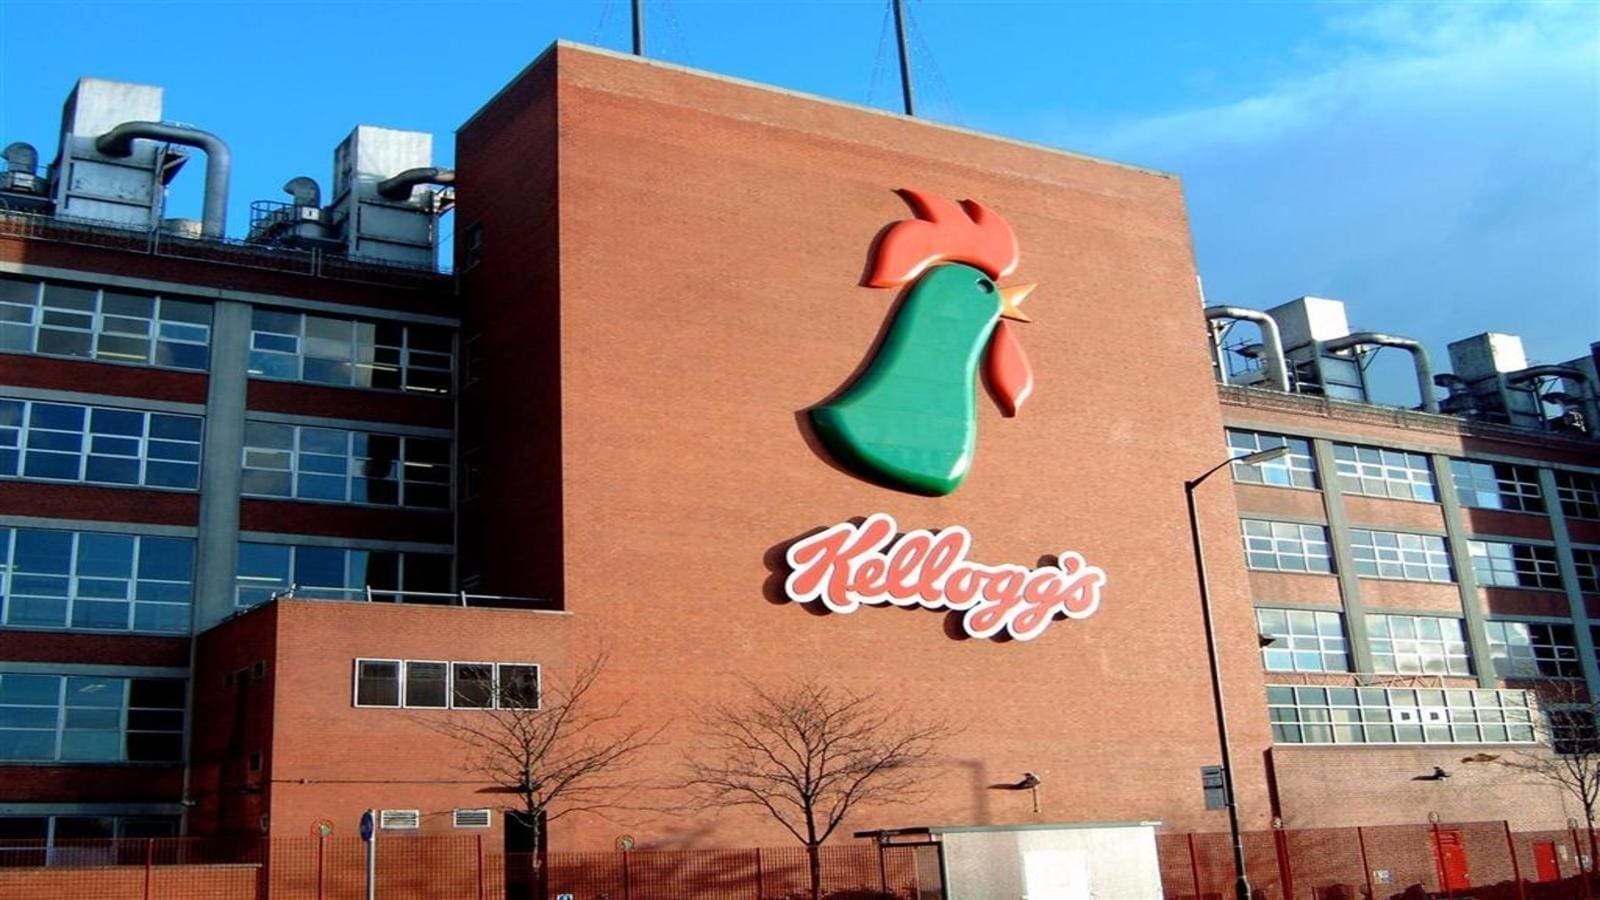 Kellogg posts 25.7% rise in full year profits even as it projects slowed demand in 2021